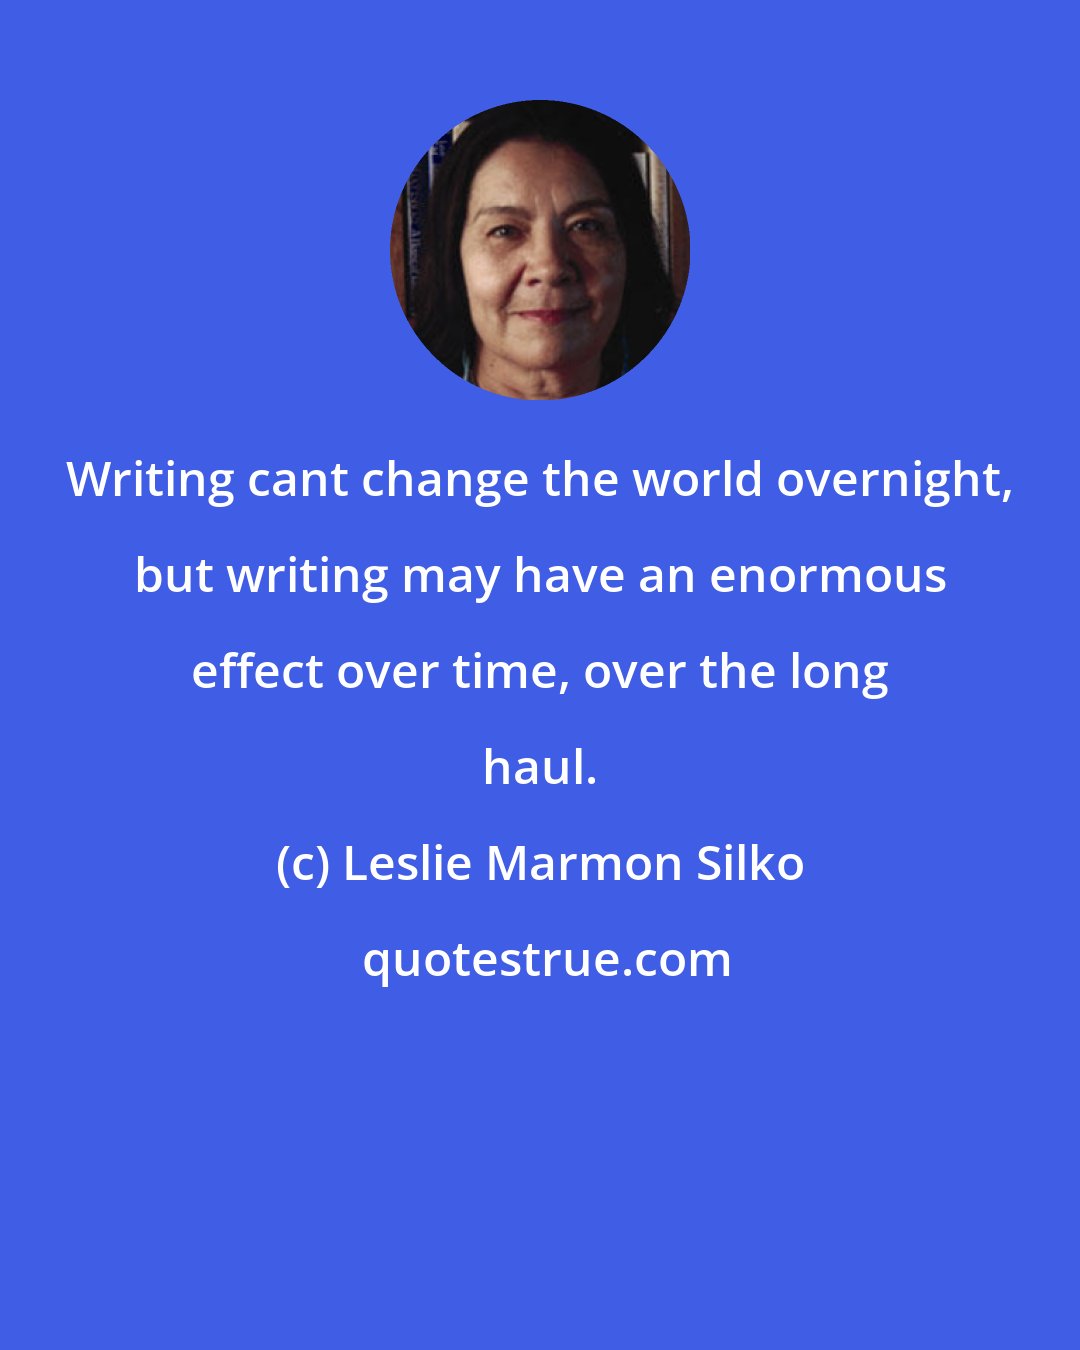 Leslie Marmon Silko: Writing cant change the world overnight, but writing may have an enormous effect over time, over the long haul.